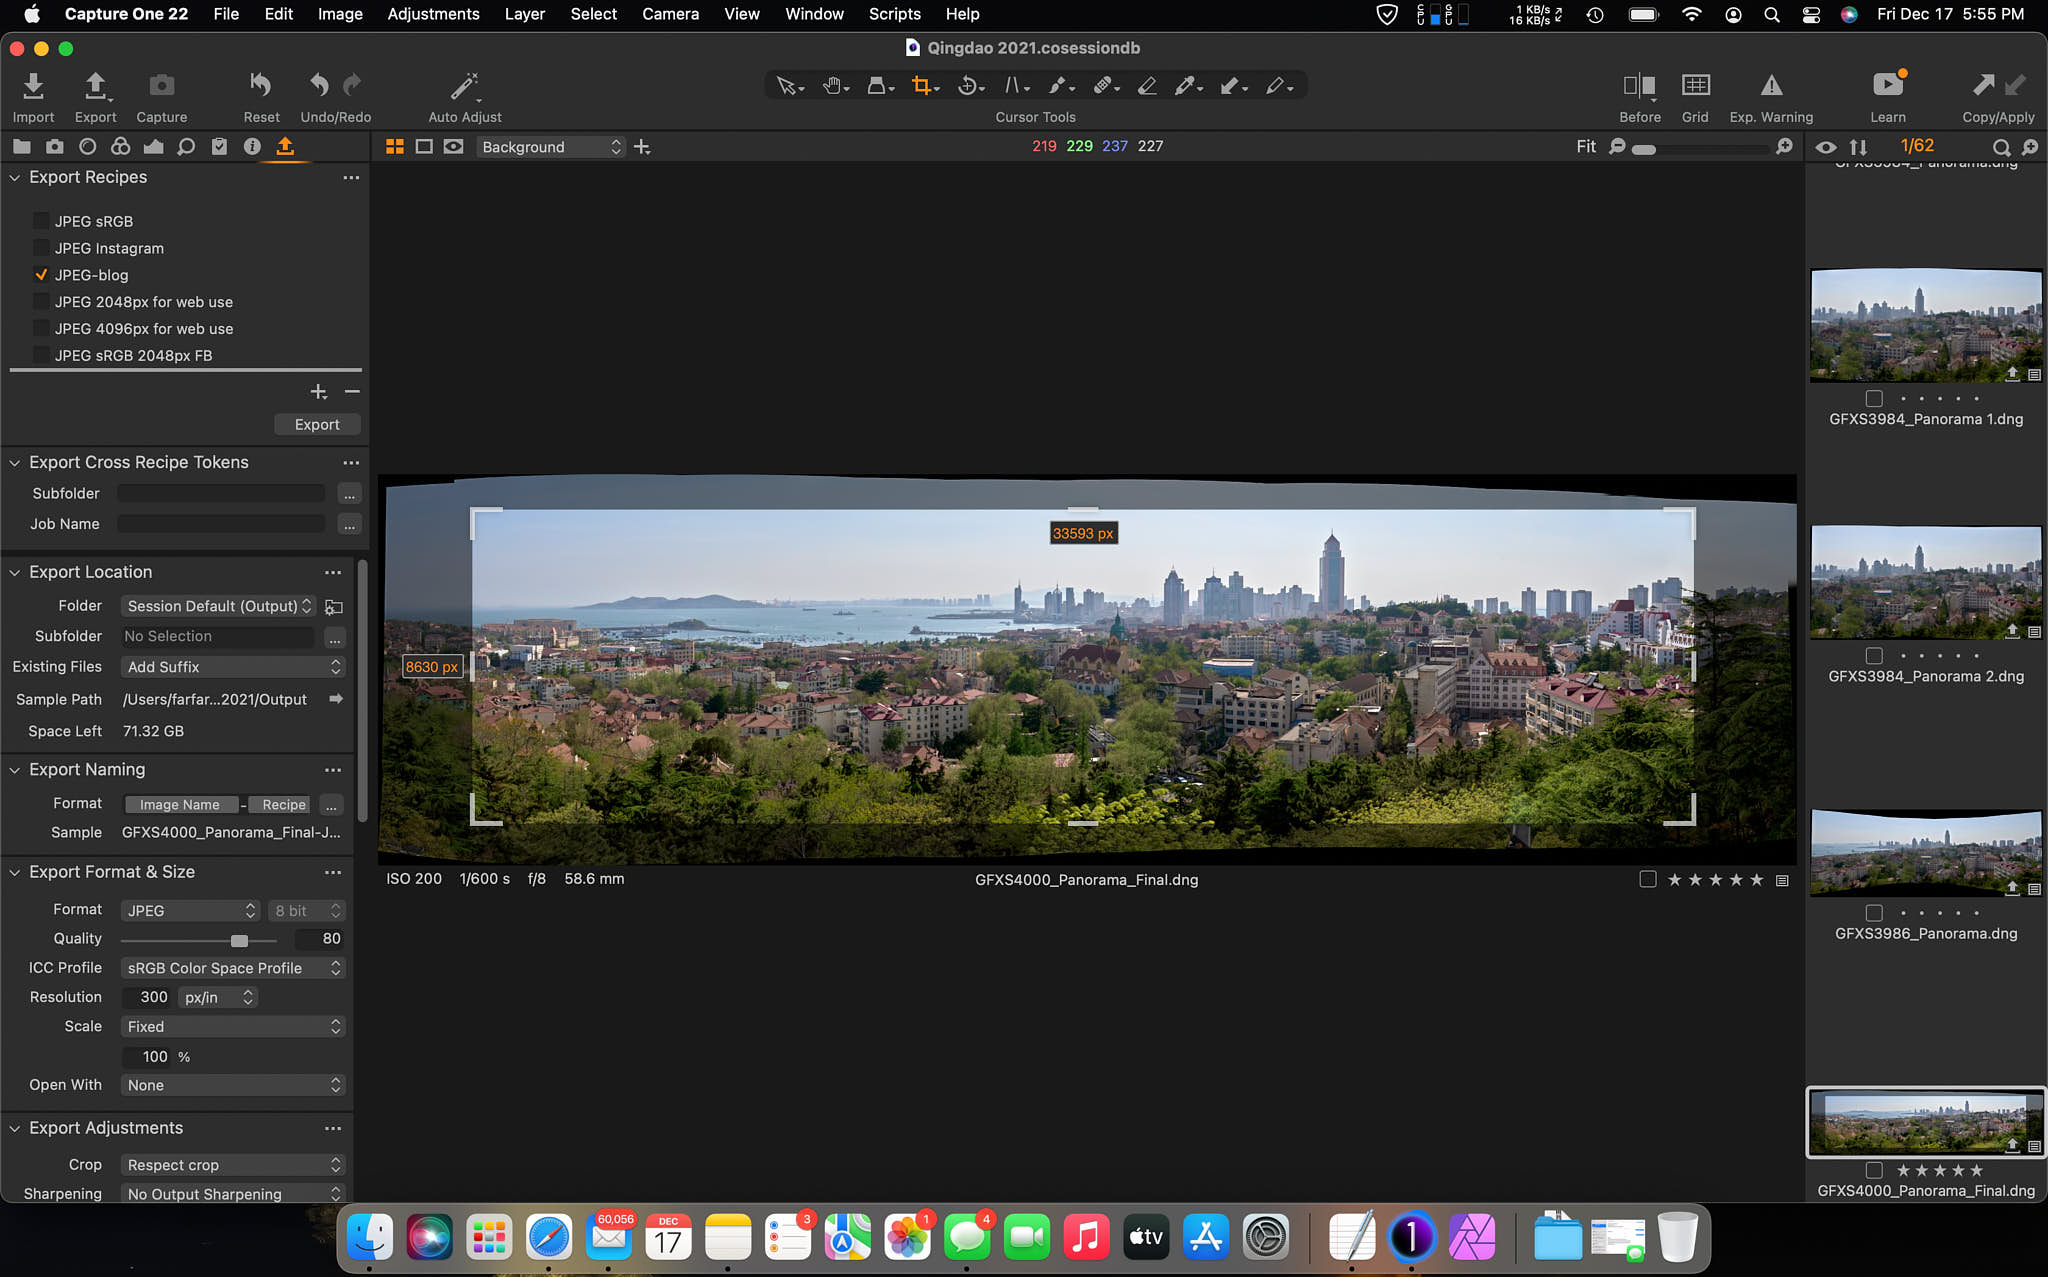 Screen shot of Capture One 22 Panorama Stitching feature